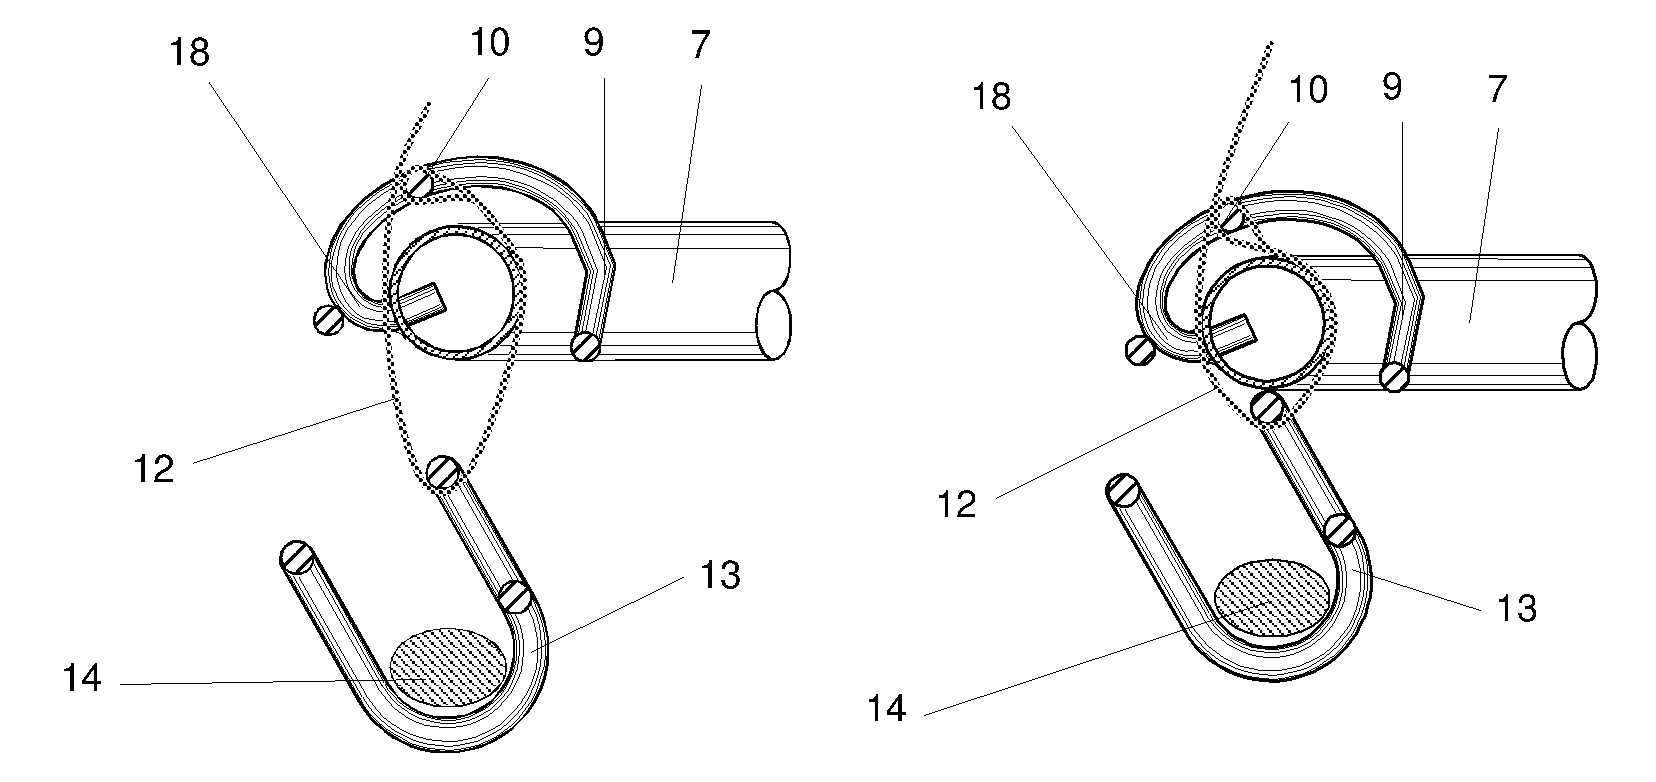 Device for handling a load hoisted between two locations offset both vertically and horizontally